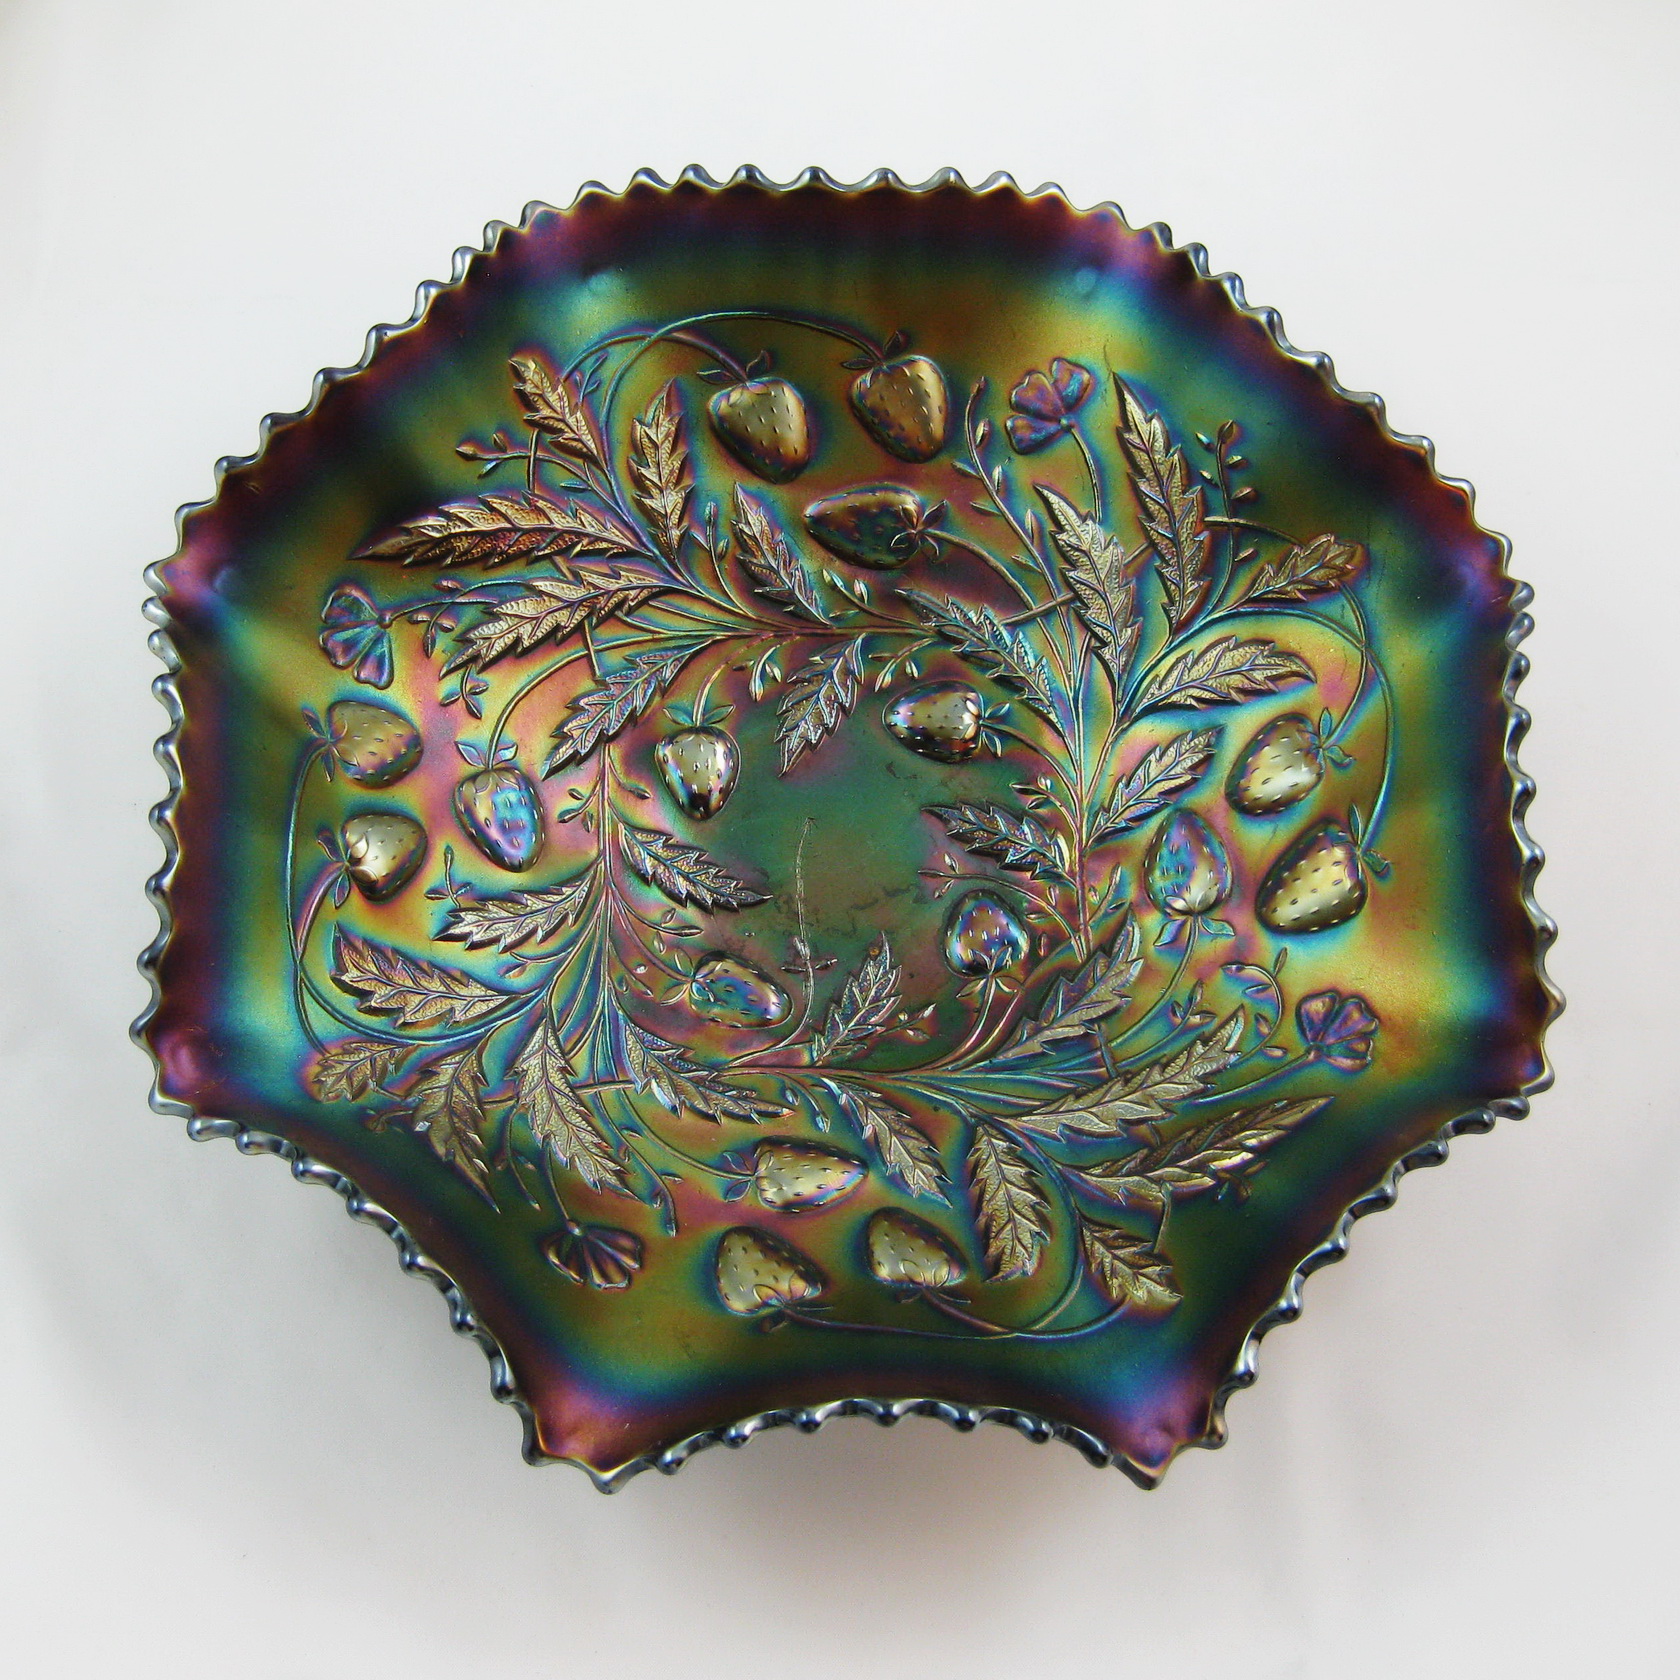 2.5 inches high. amethyst bowl 8.5 inches diameter Produced by Northwood 1910 to 1914 Carnival glass Strawberry ruffled